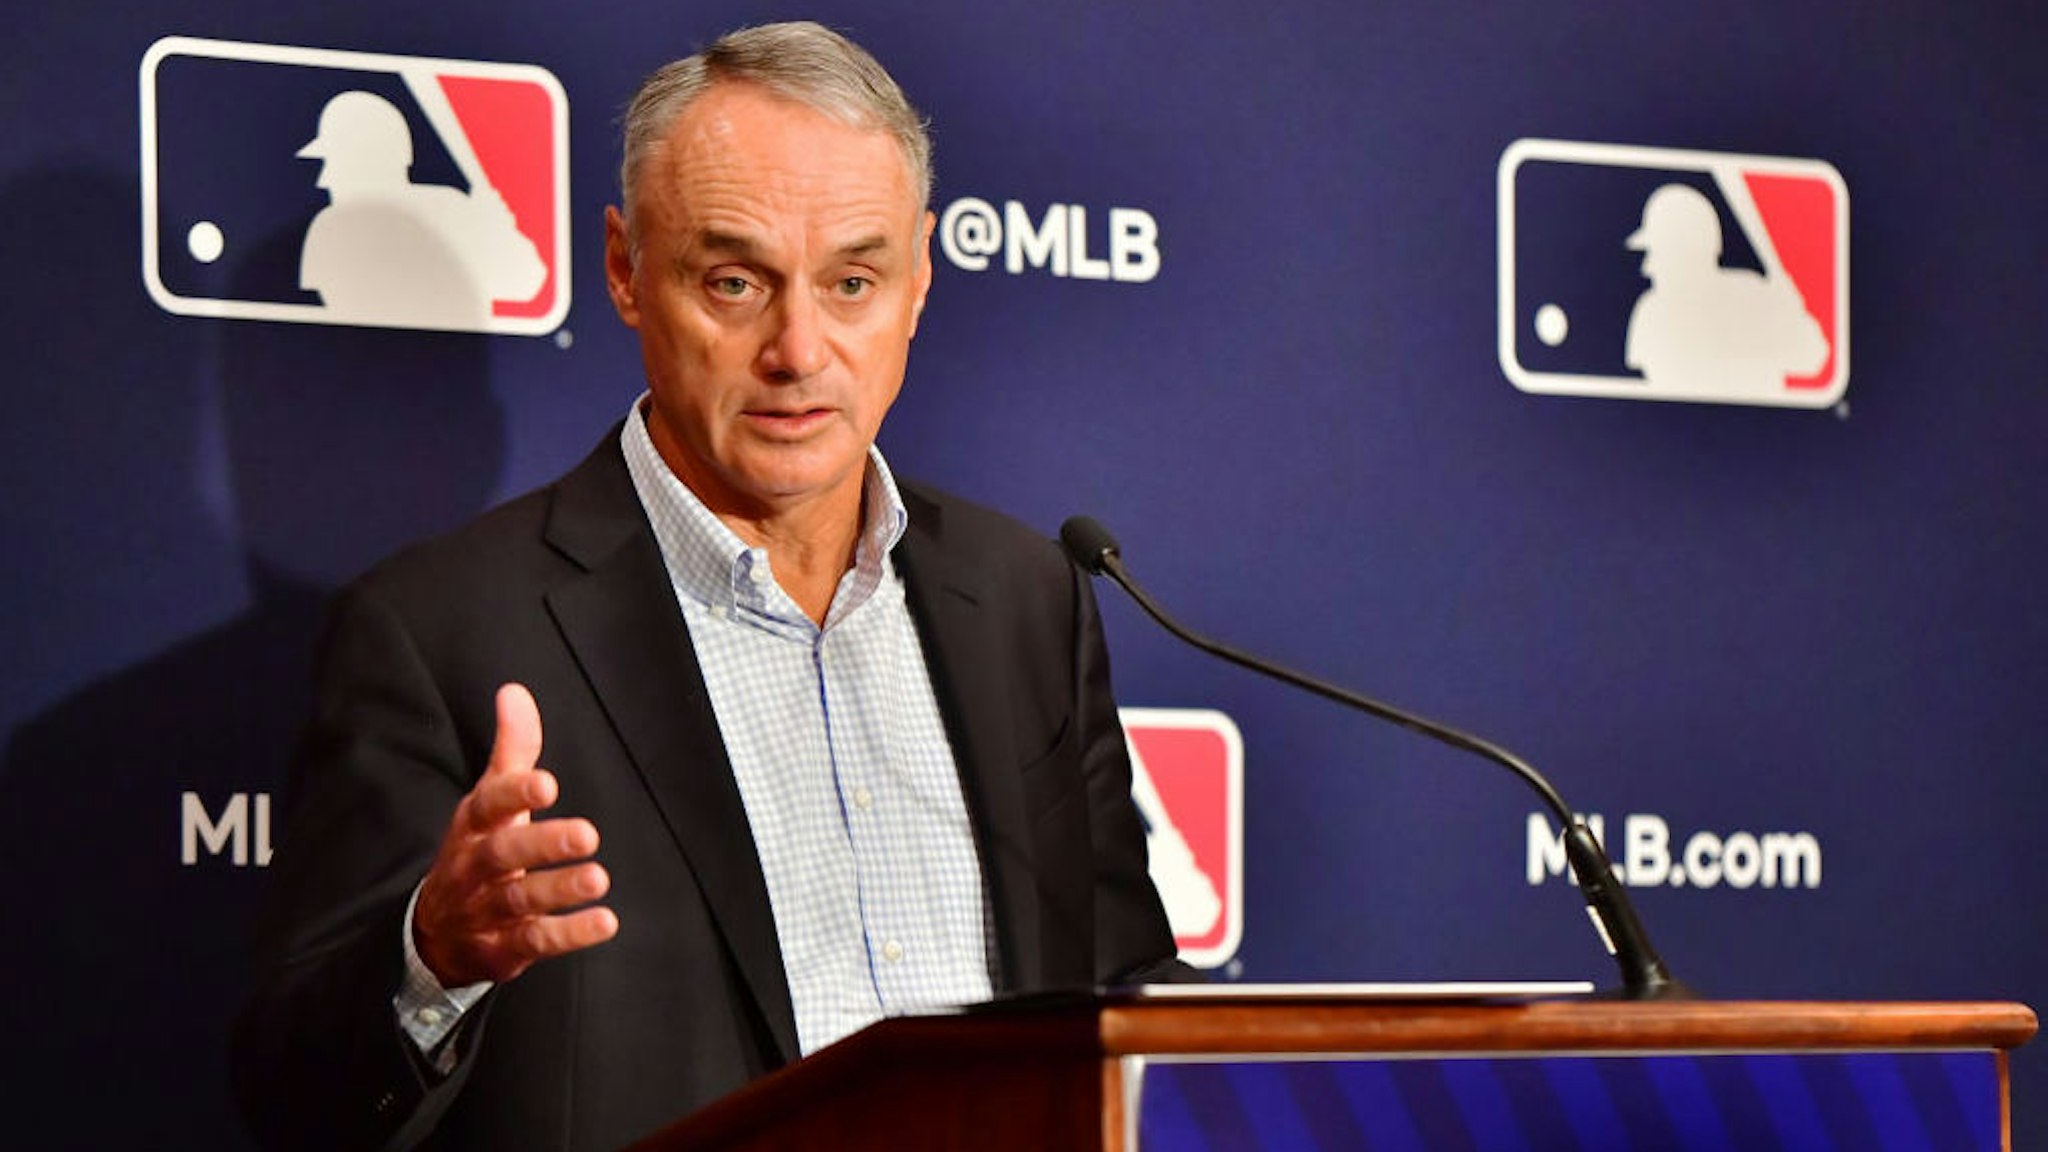 ORLANDO, FLORIDA - FEBRUARY 10: Major League Baseball Commissioner Rob Manfred answers questions during an MLB owner's meeting at the Waldorf Astoria on February 10, 2022 in Orlando, Florida. Manfred addressed the ongoing lockout of players, which owners put in place after the league's collective bargaining agreement ended on December 1, 2021. (Photo by Julio Aguilar/Getty Images)